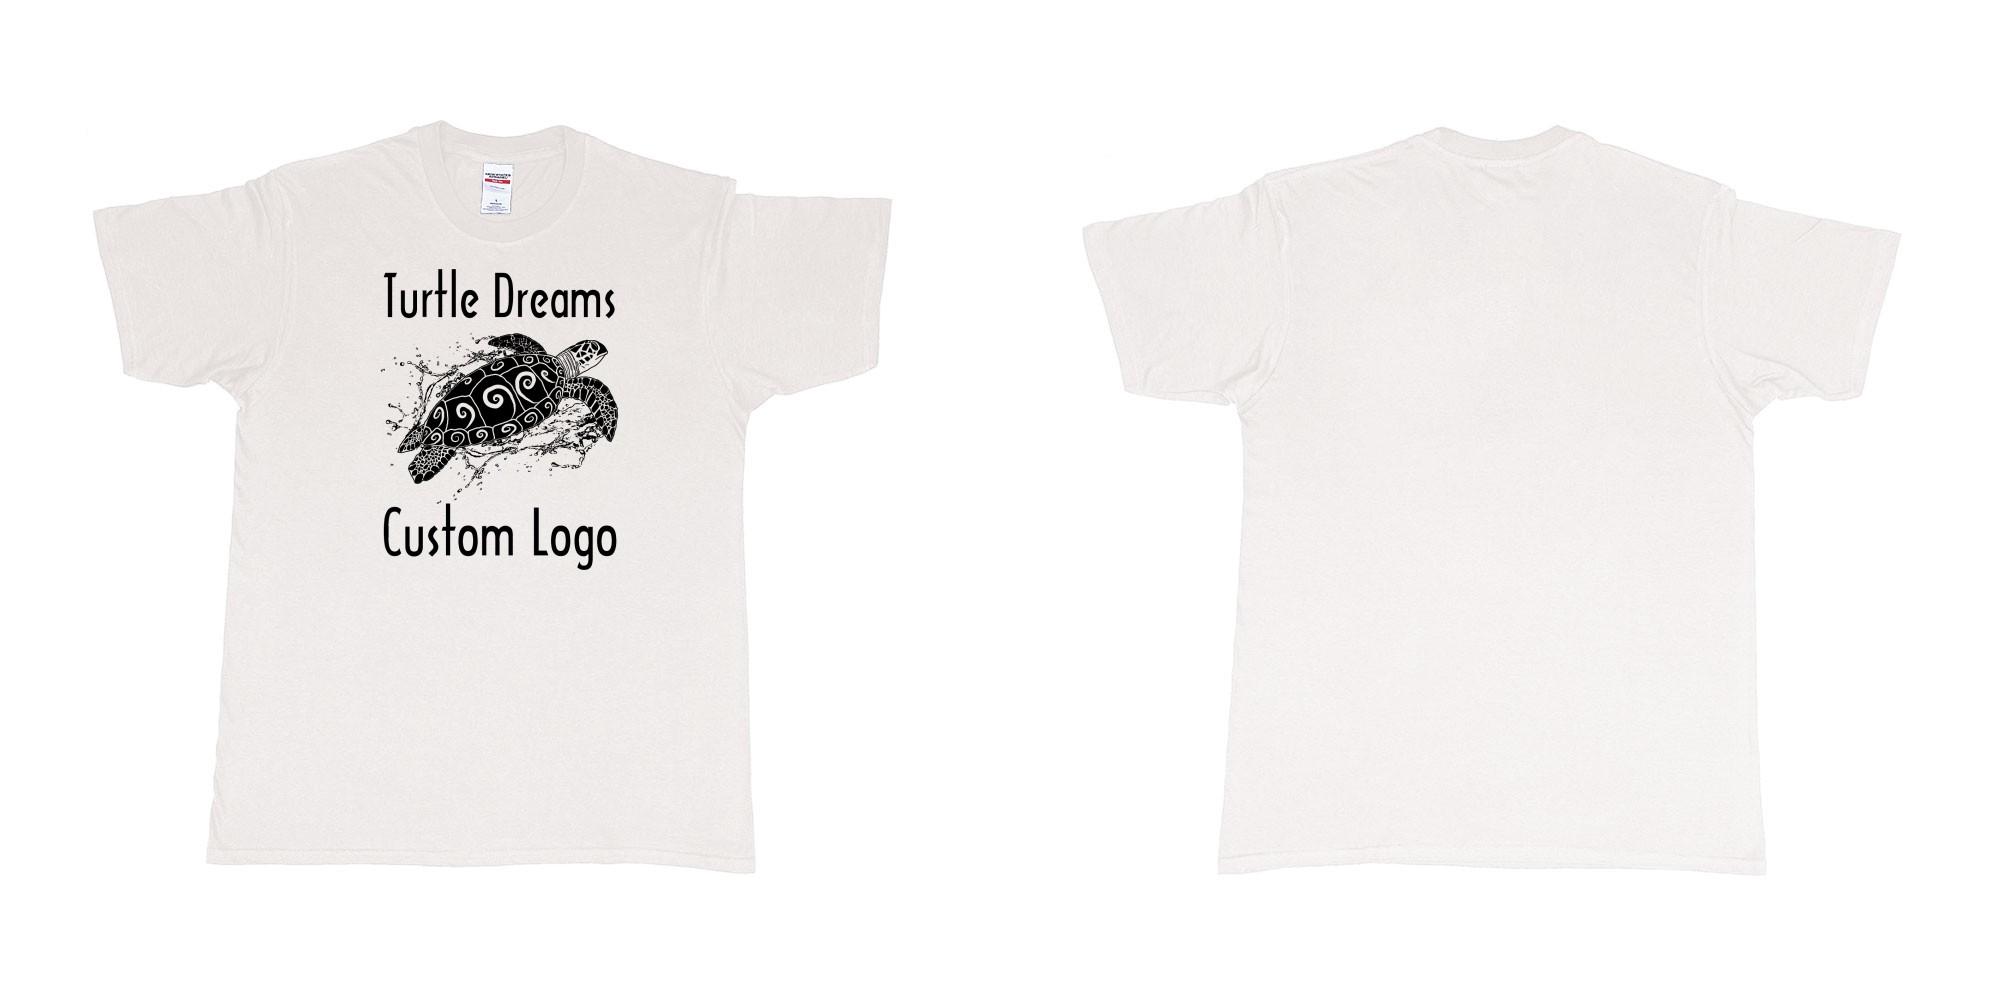 Custom tshirt design turtle dreams custom logo design in fabric color white choice your own text made in Bali by The Pirate Way